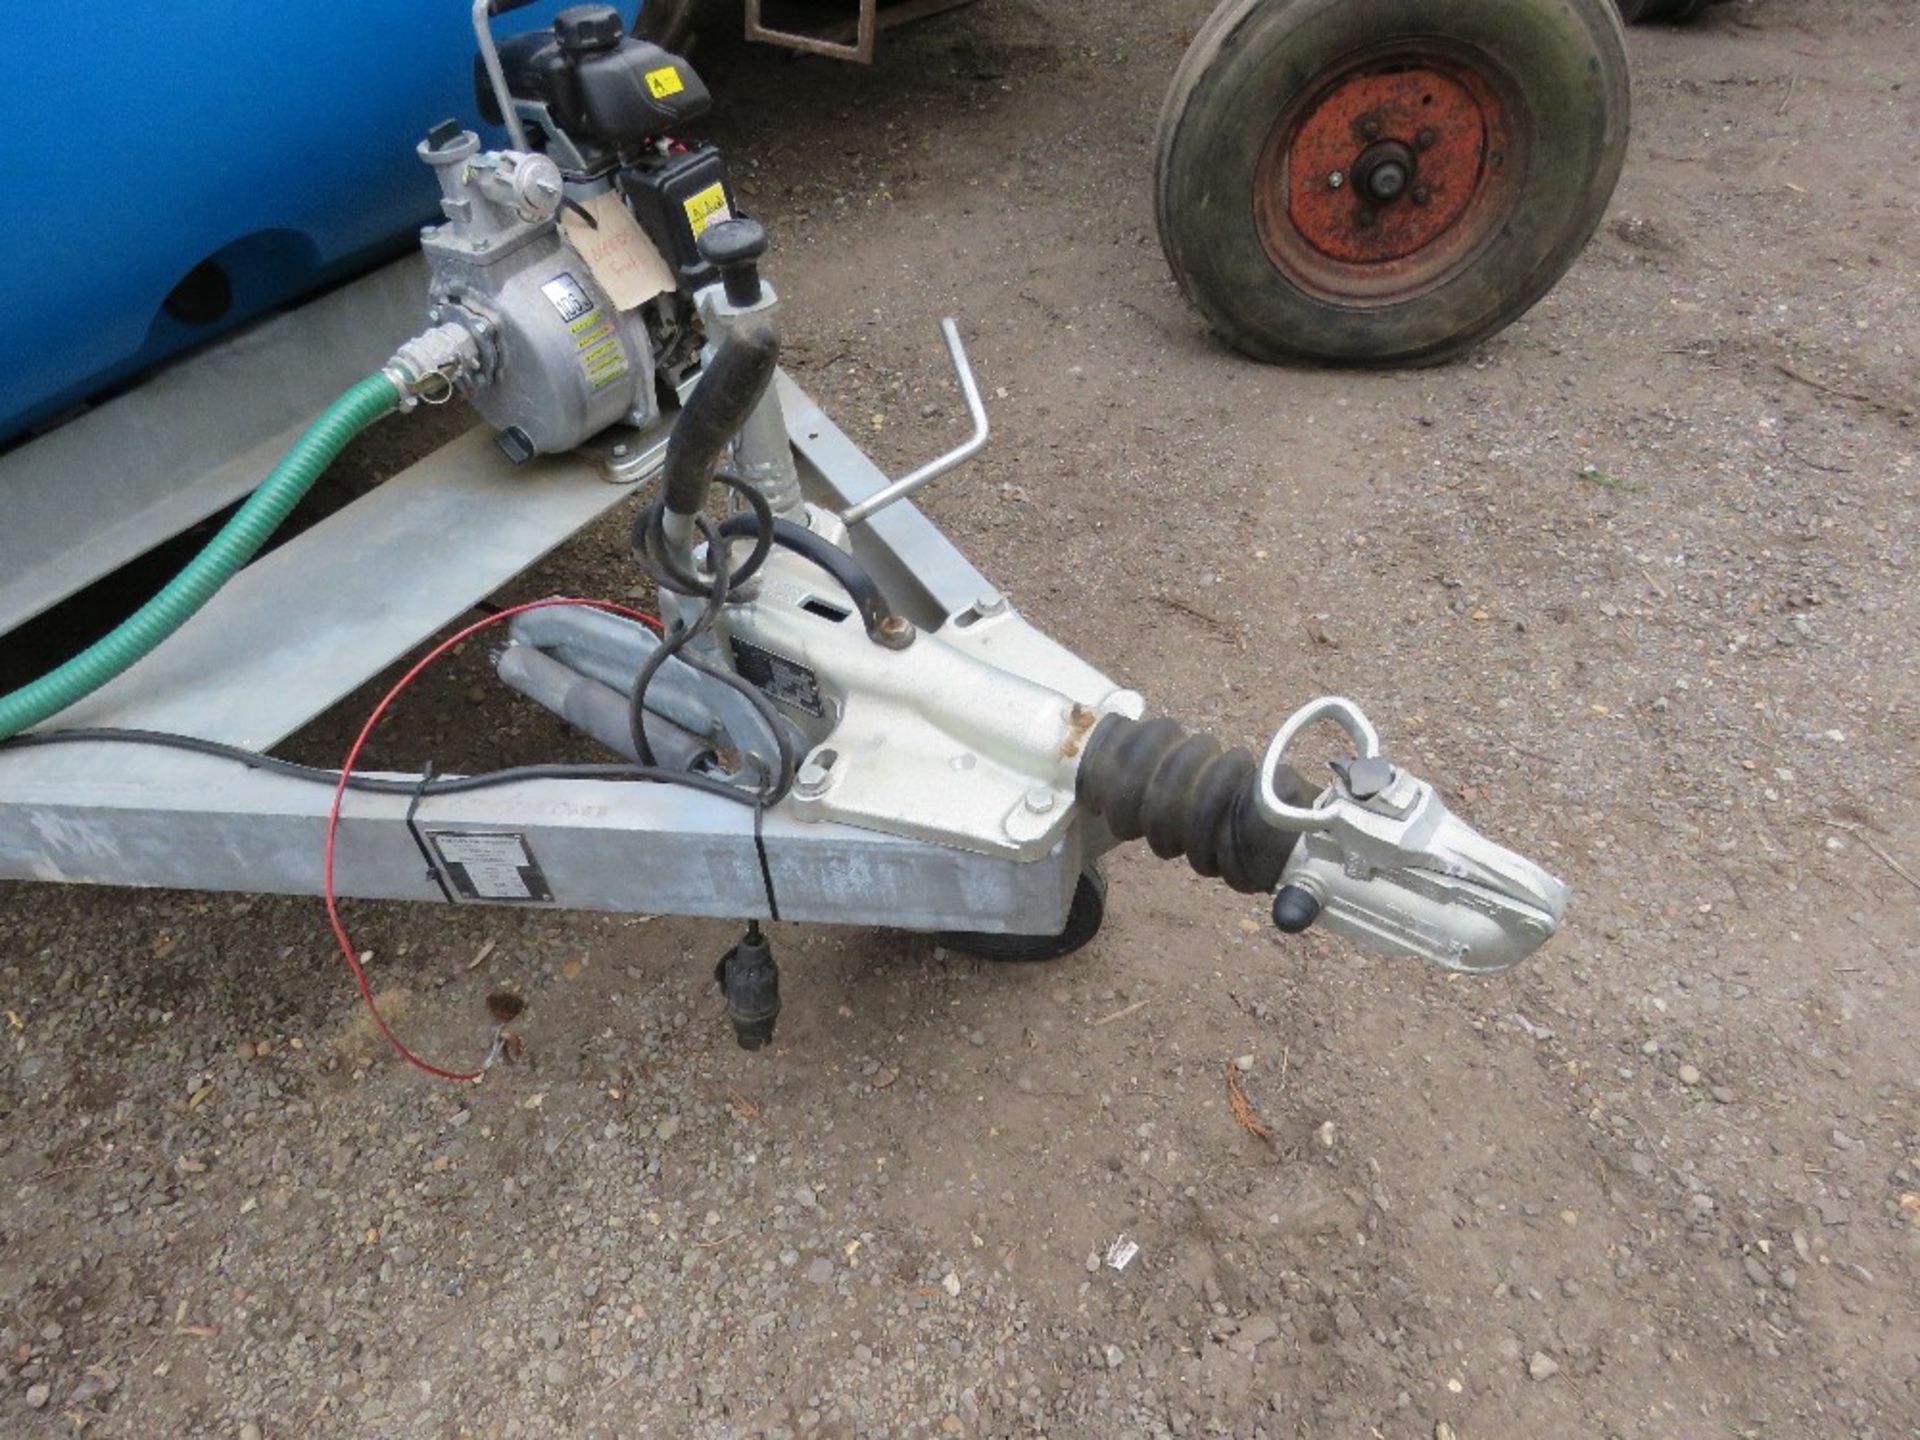 TRAILER ENGINEERING SINGLE AXLED WATER BOWSER WITH HONDA WATER PUMP. OWNER DOWNSIZING SO SURPLUS TO - Image 2 of 7